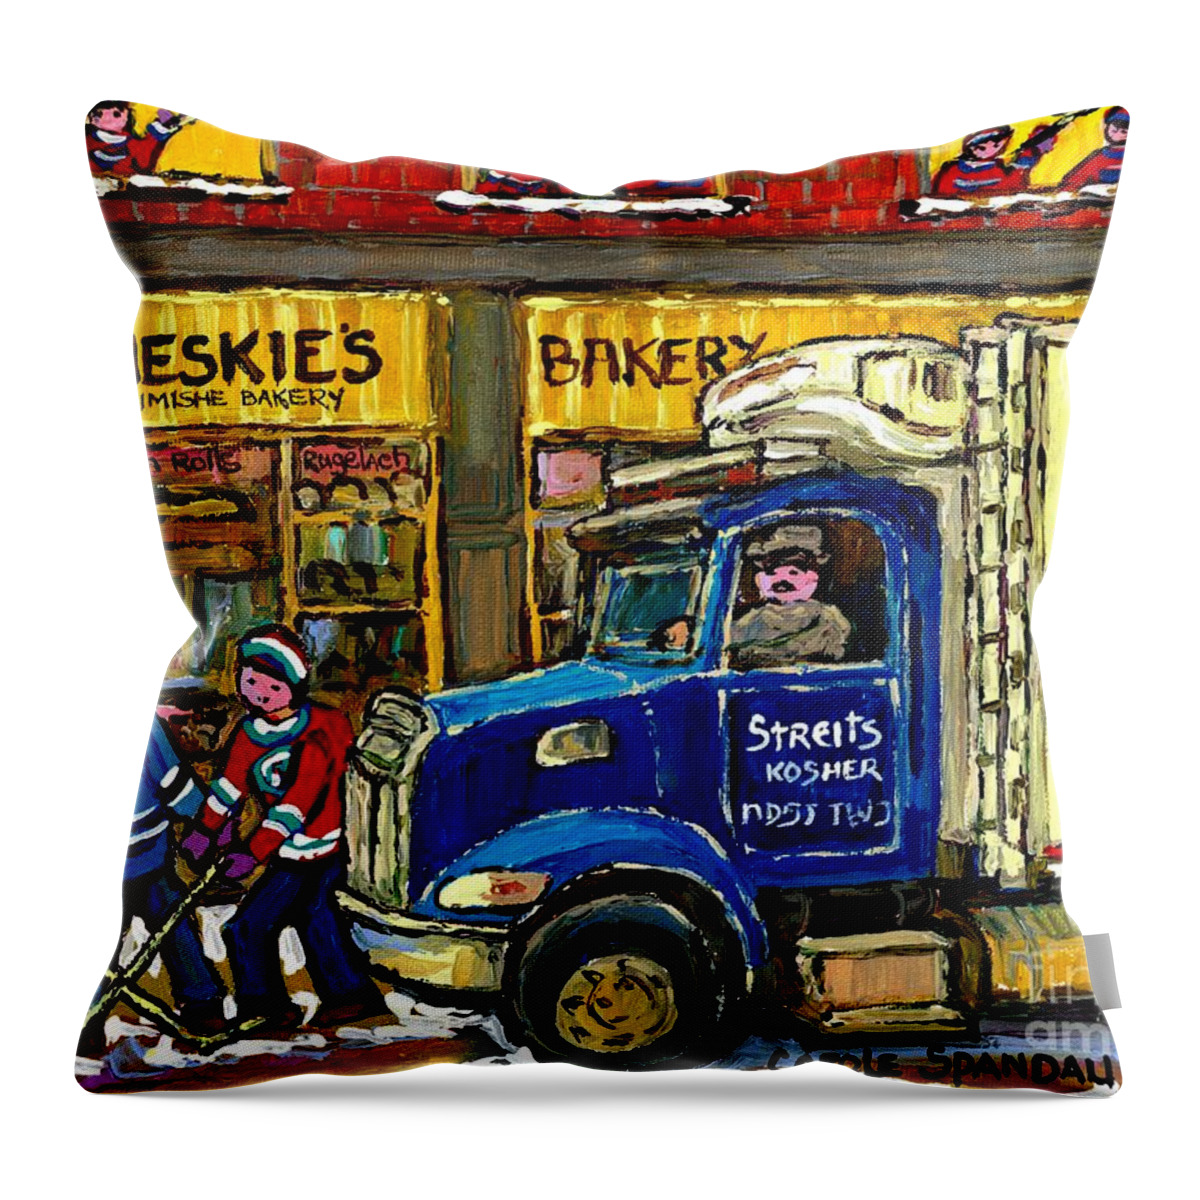 Montreal Throw Pillow featuring the painting Cheskie's Kosher Bakery On Bernard Hockey Game Near Streit's Truck Montreal Winter Snow Scene  by Carole Spandau